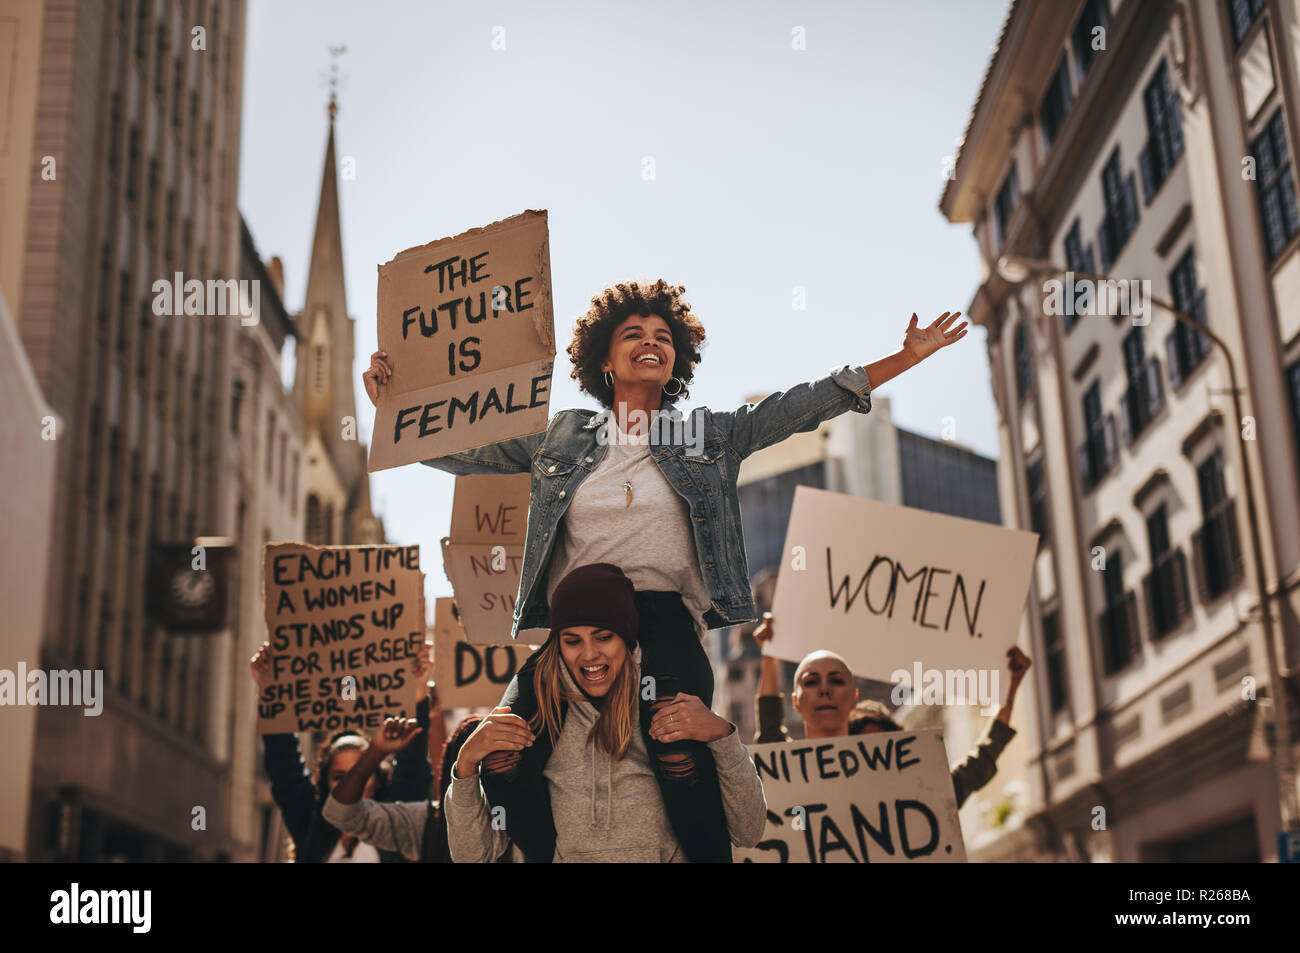 Group of female protesters marching on the road with signboards and smiling. Women holding protest banners and marching outdoors. Stock Photo